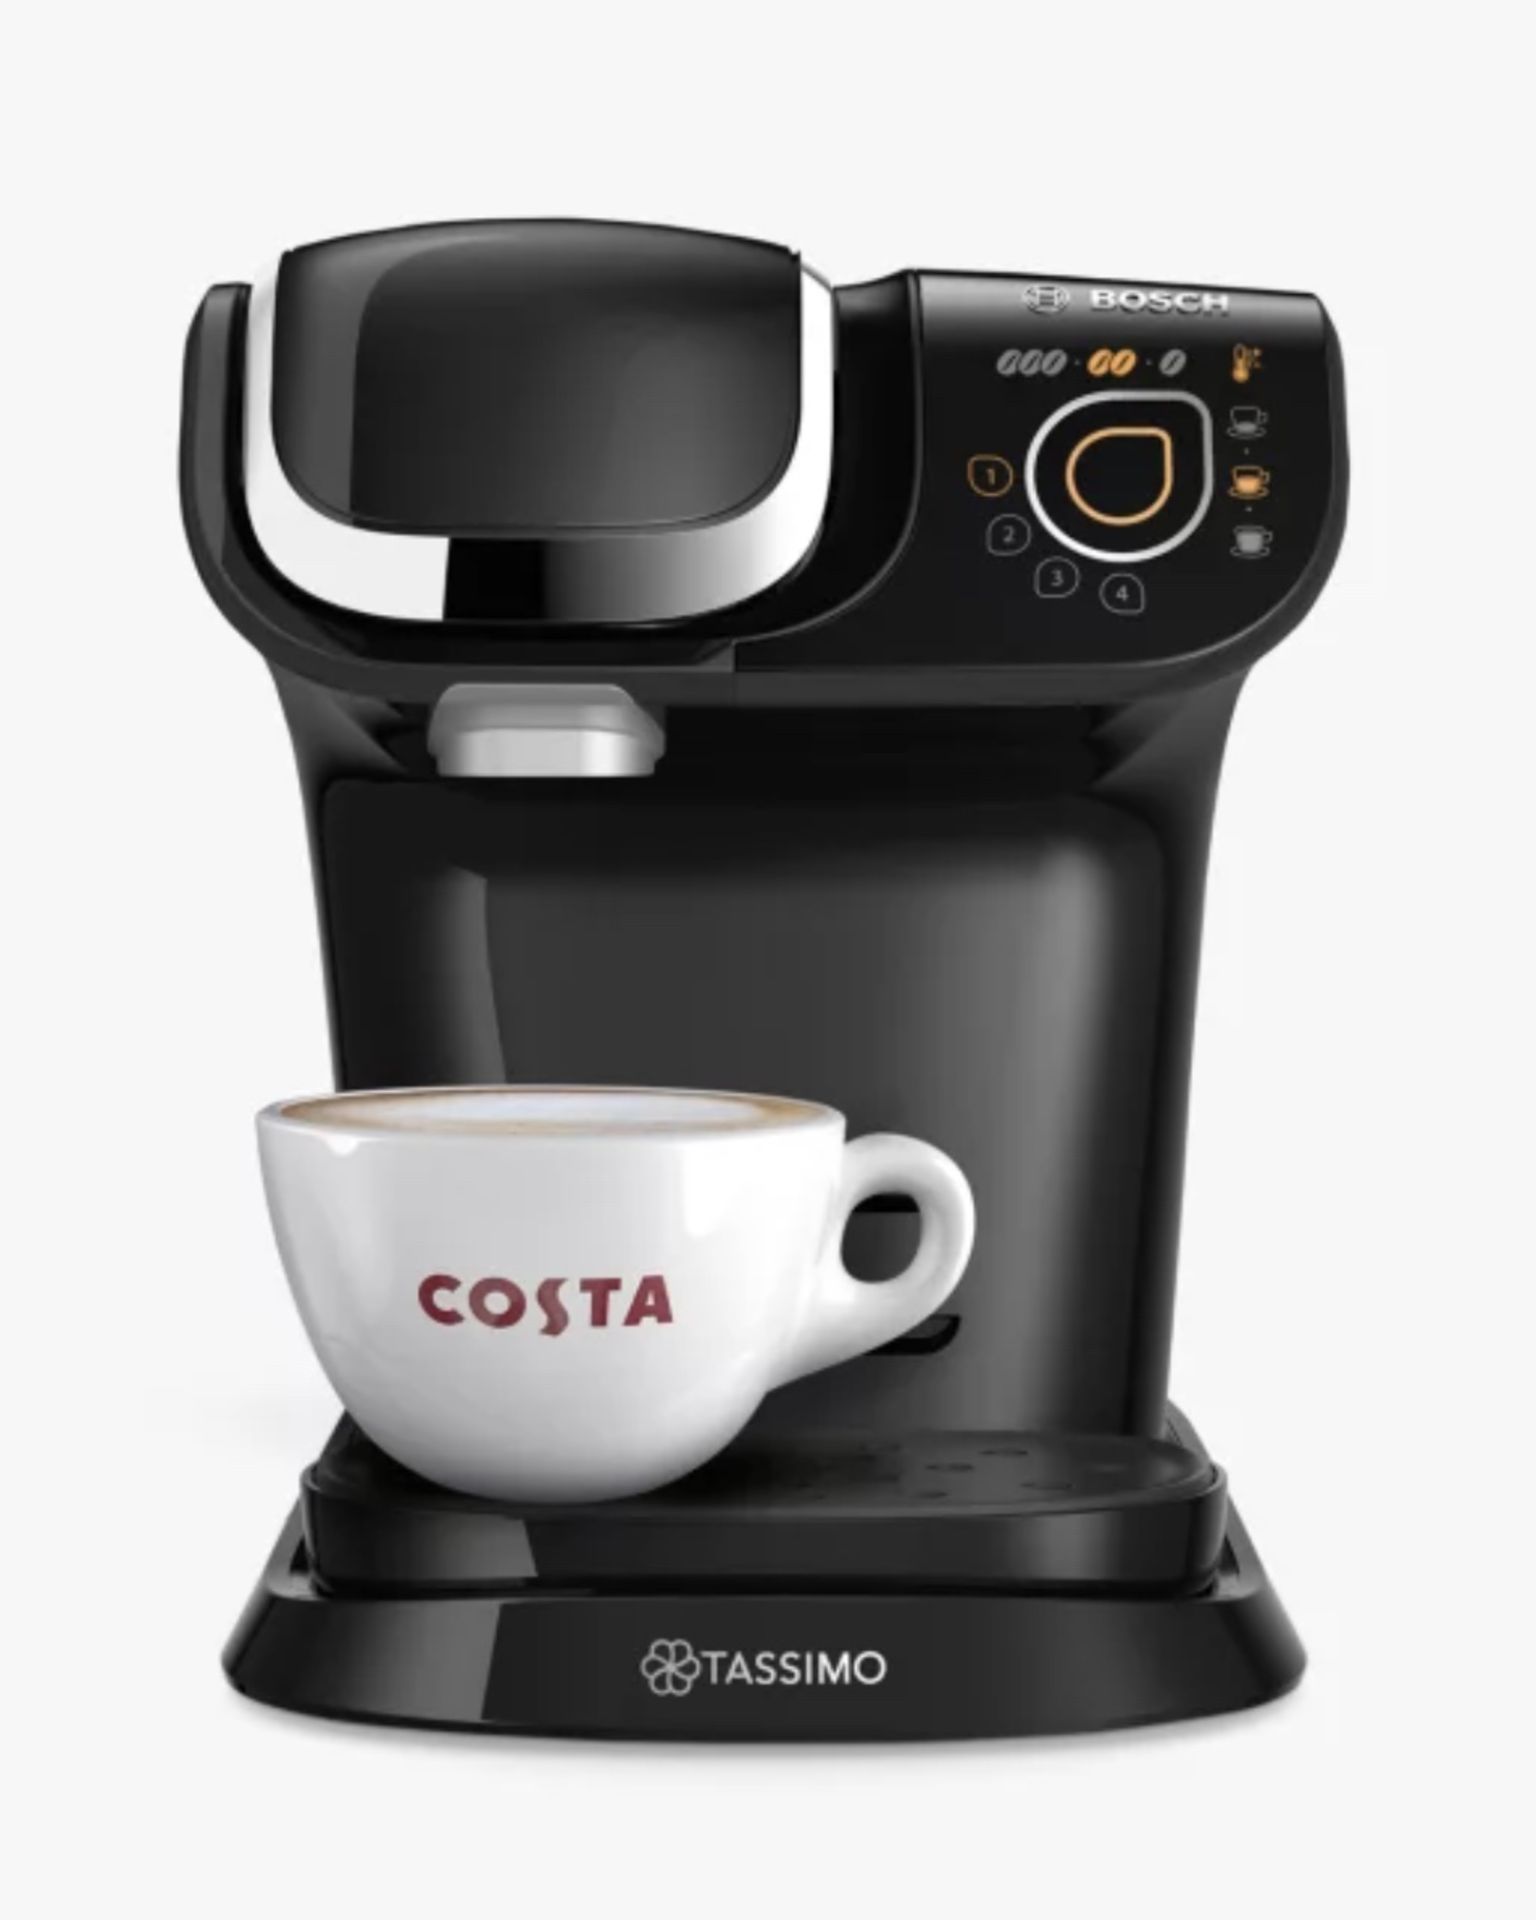 TASSIMO by Bosch Tassimo MyWay 2 Coffee Machine, Black RRP £59.99